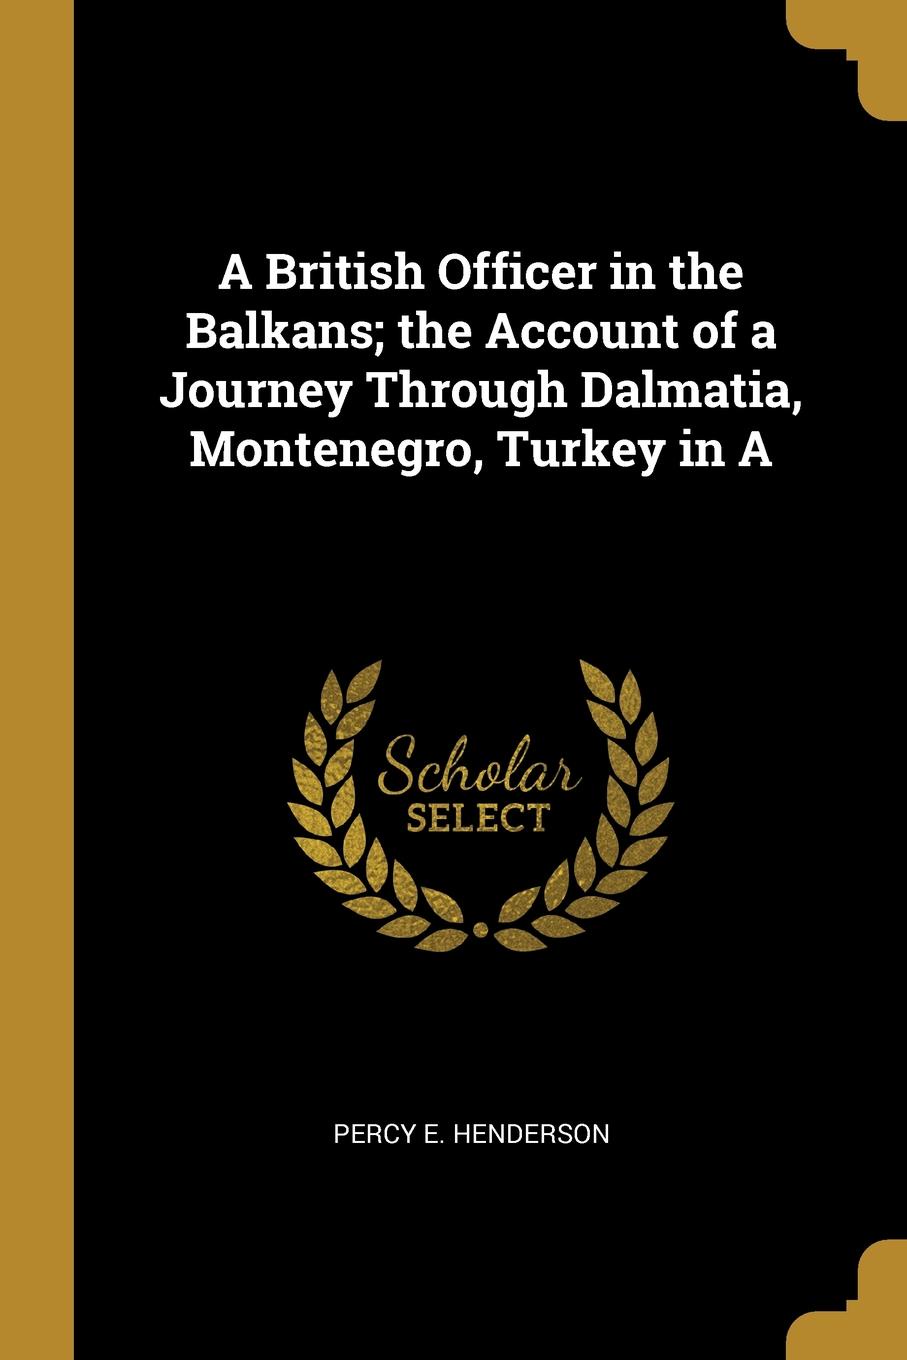 A British Officer in the Balkans; the Account of a Journey Through Dalmatia, Montenegro, Turkey in A